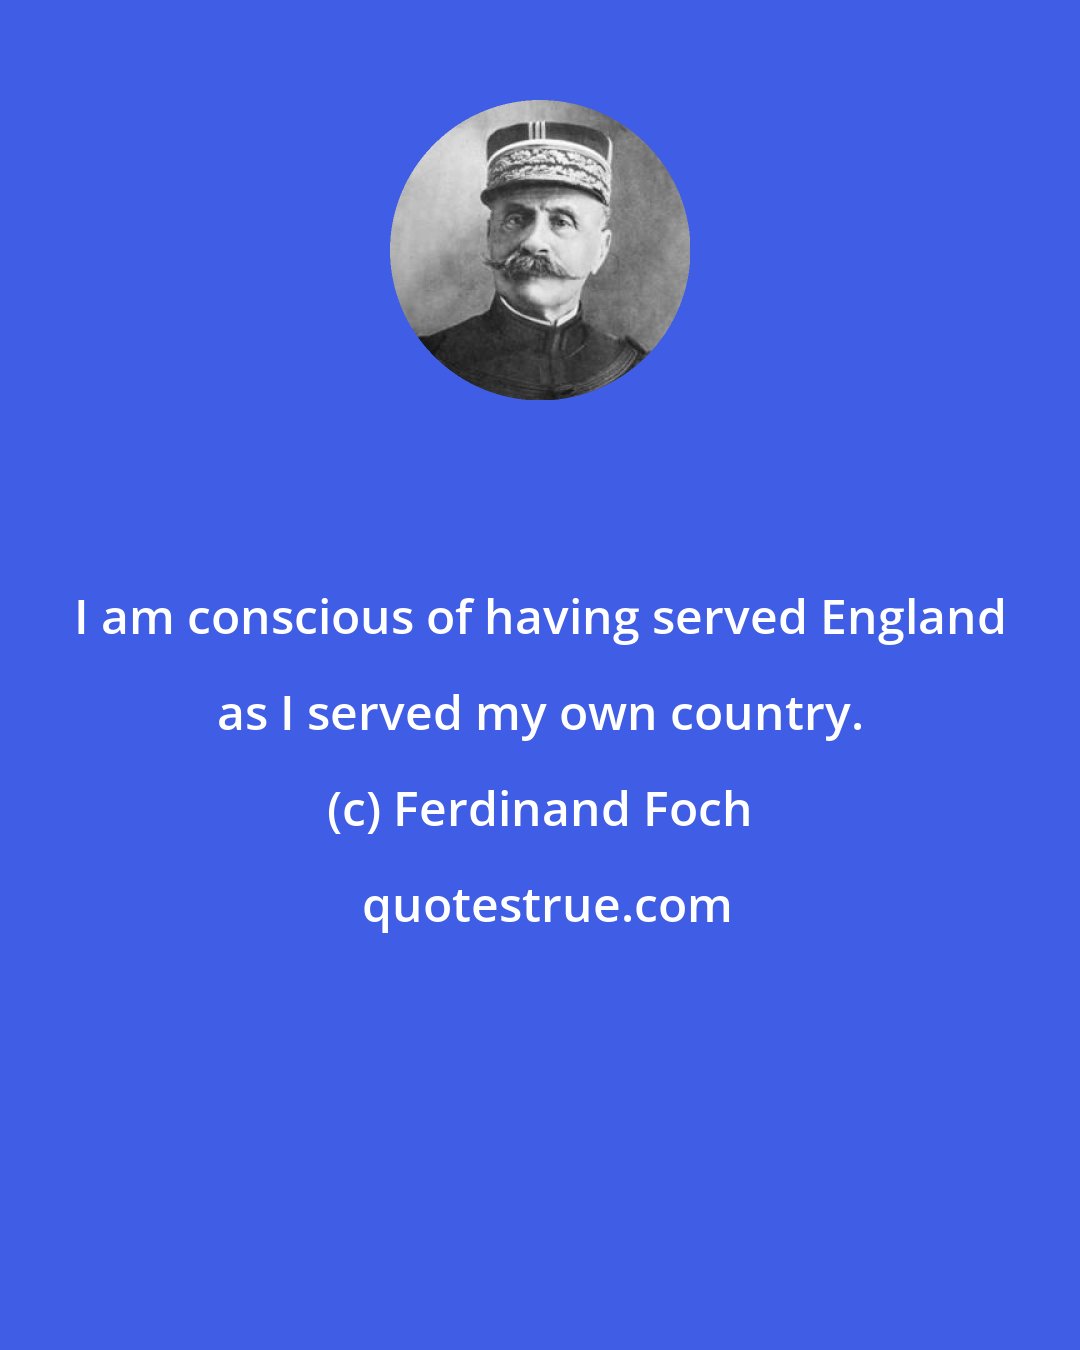 Ferdinand Foch: I am conscious of having served England as I served my own country.